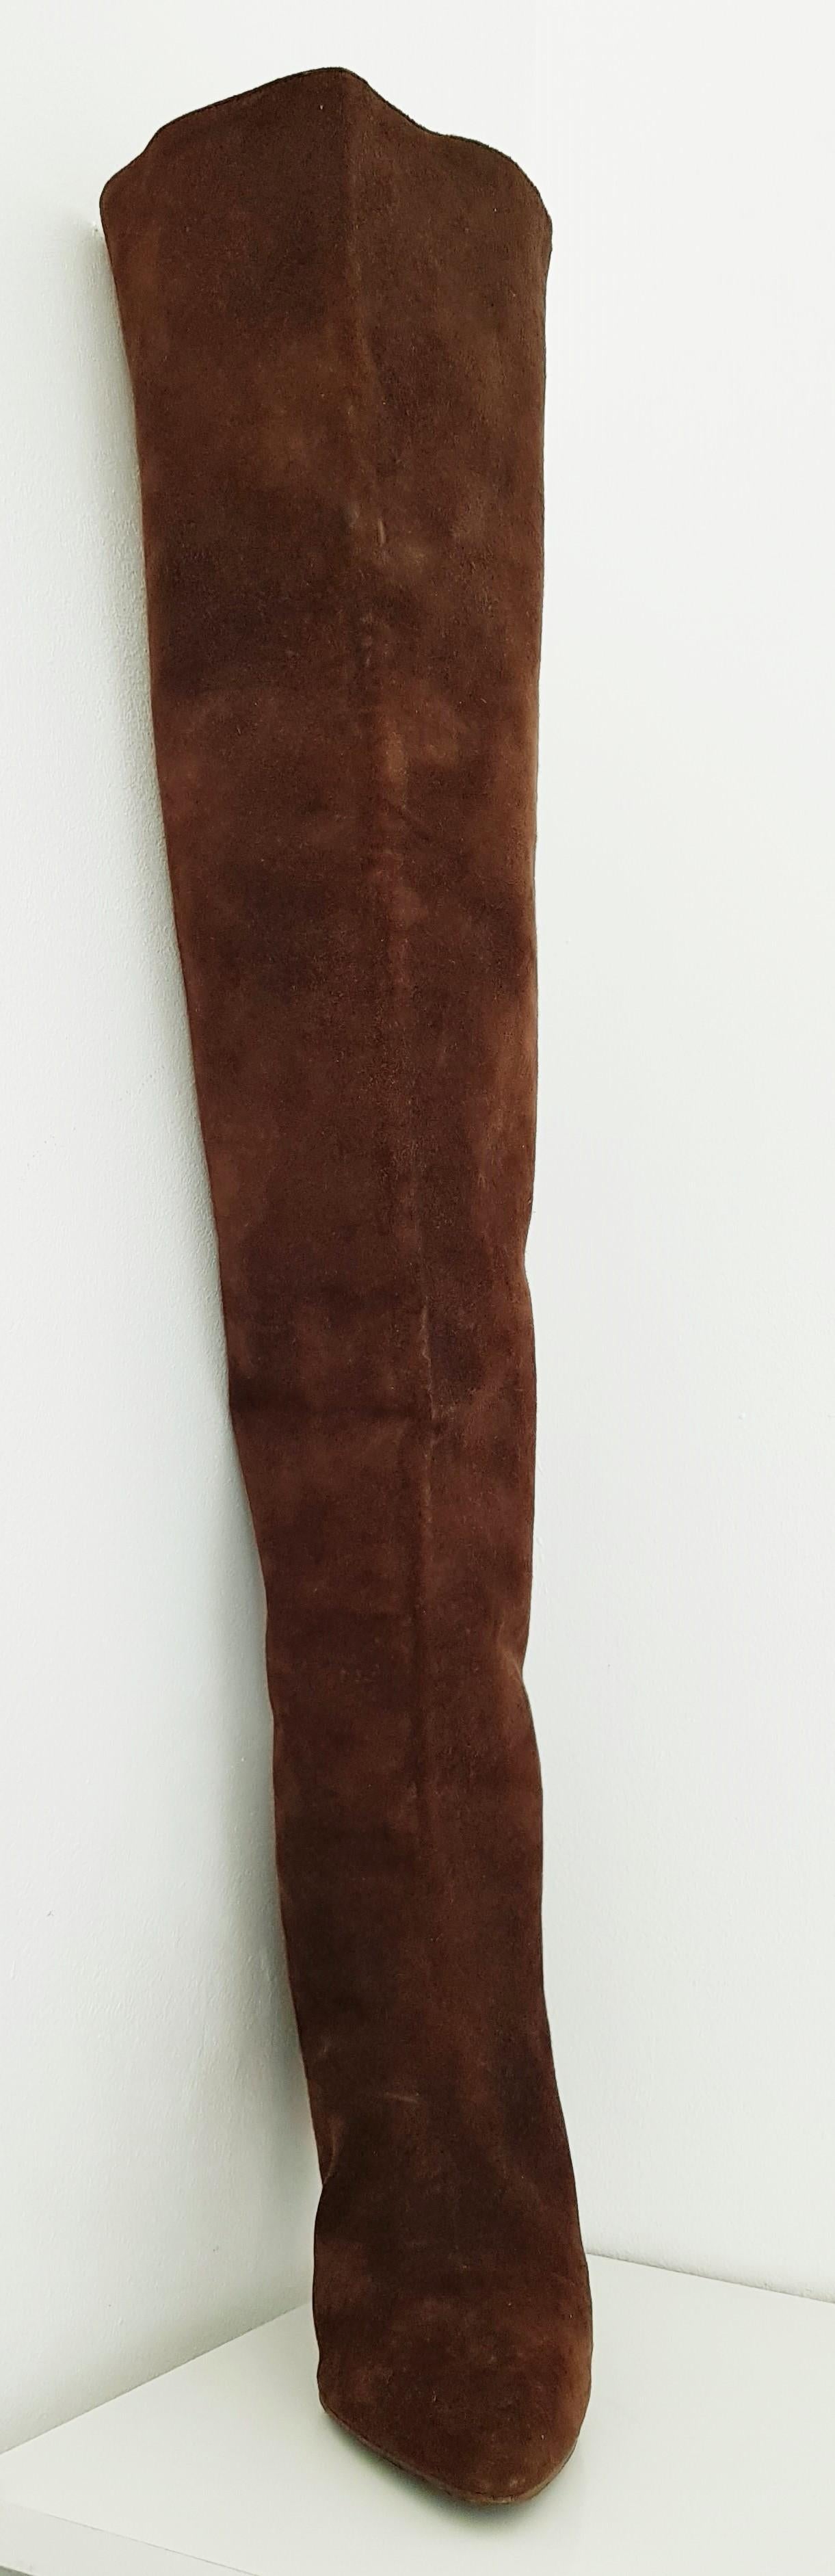 Maud Frizon Tall Brown Suede Boots
Brown Suede
Size 39 1/2 (59)
Length: 26 cm
Width: 7.5 cm
Heel height: 8 cm
Boots height: 85 cm
Made in Italy